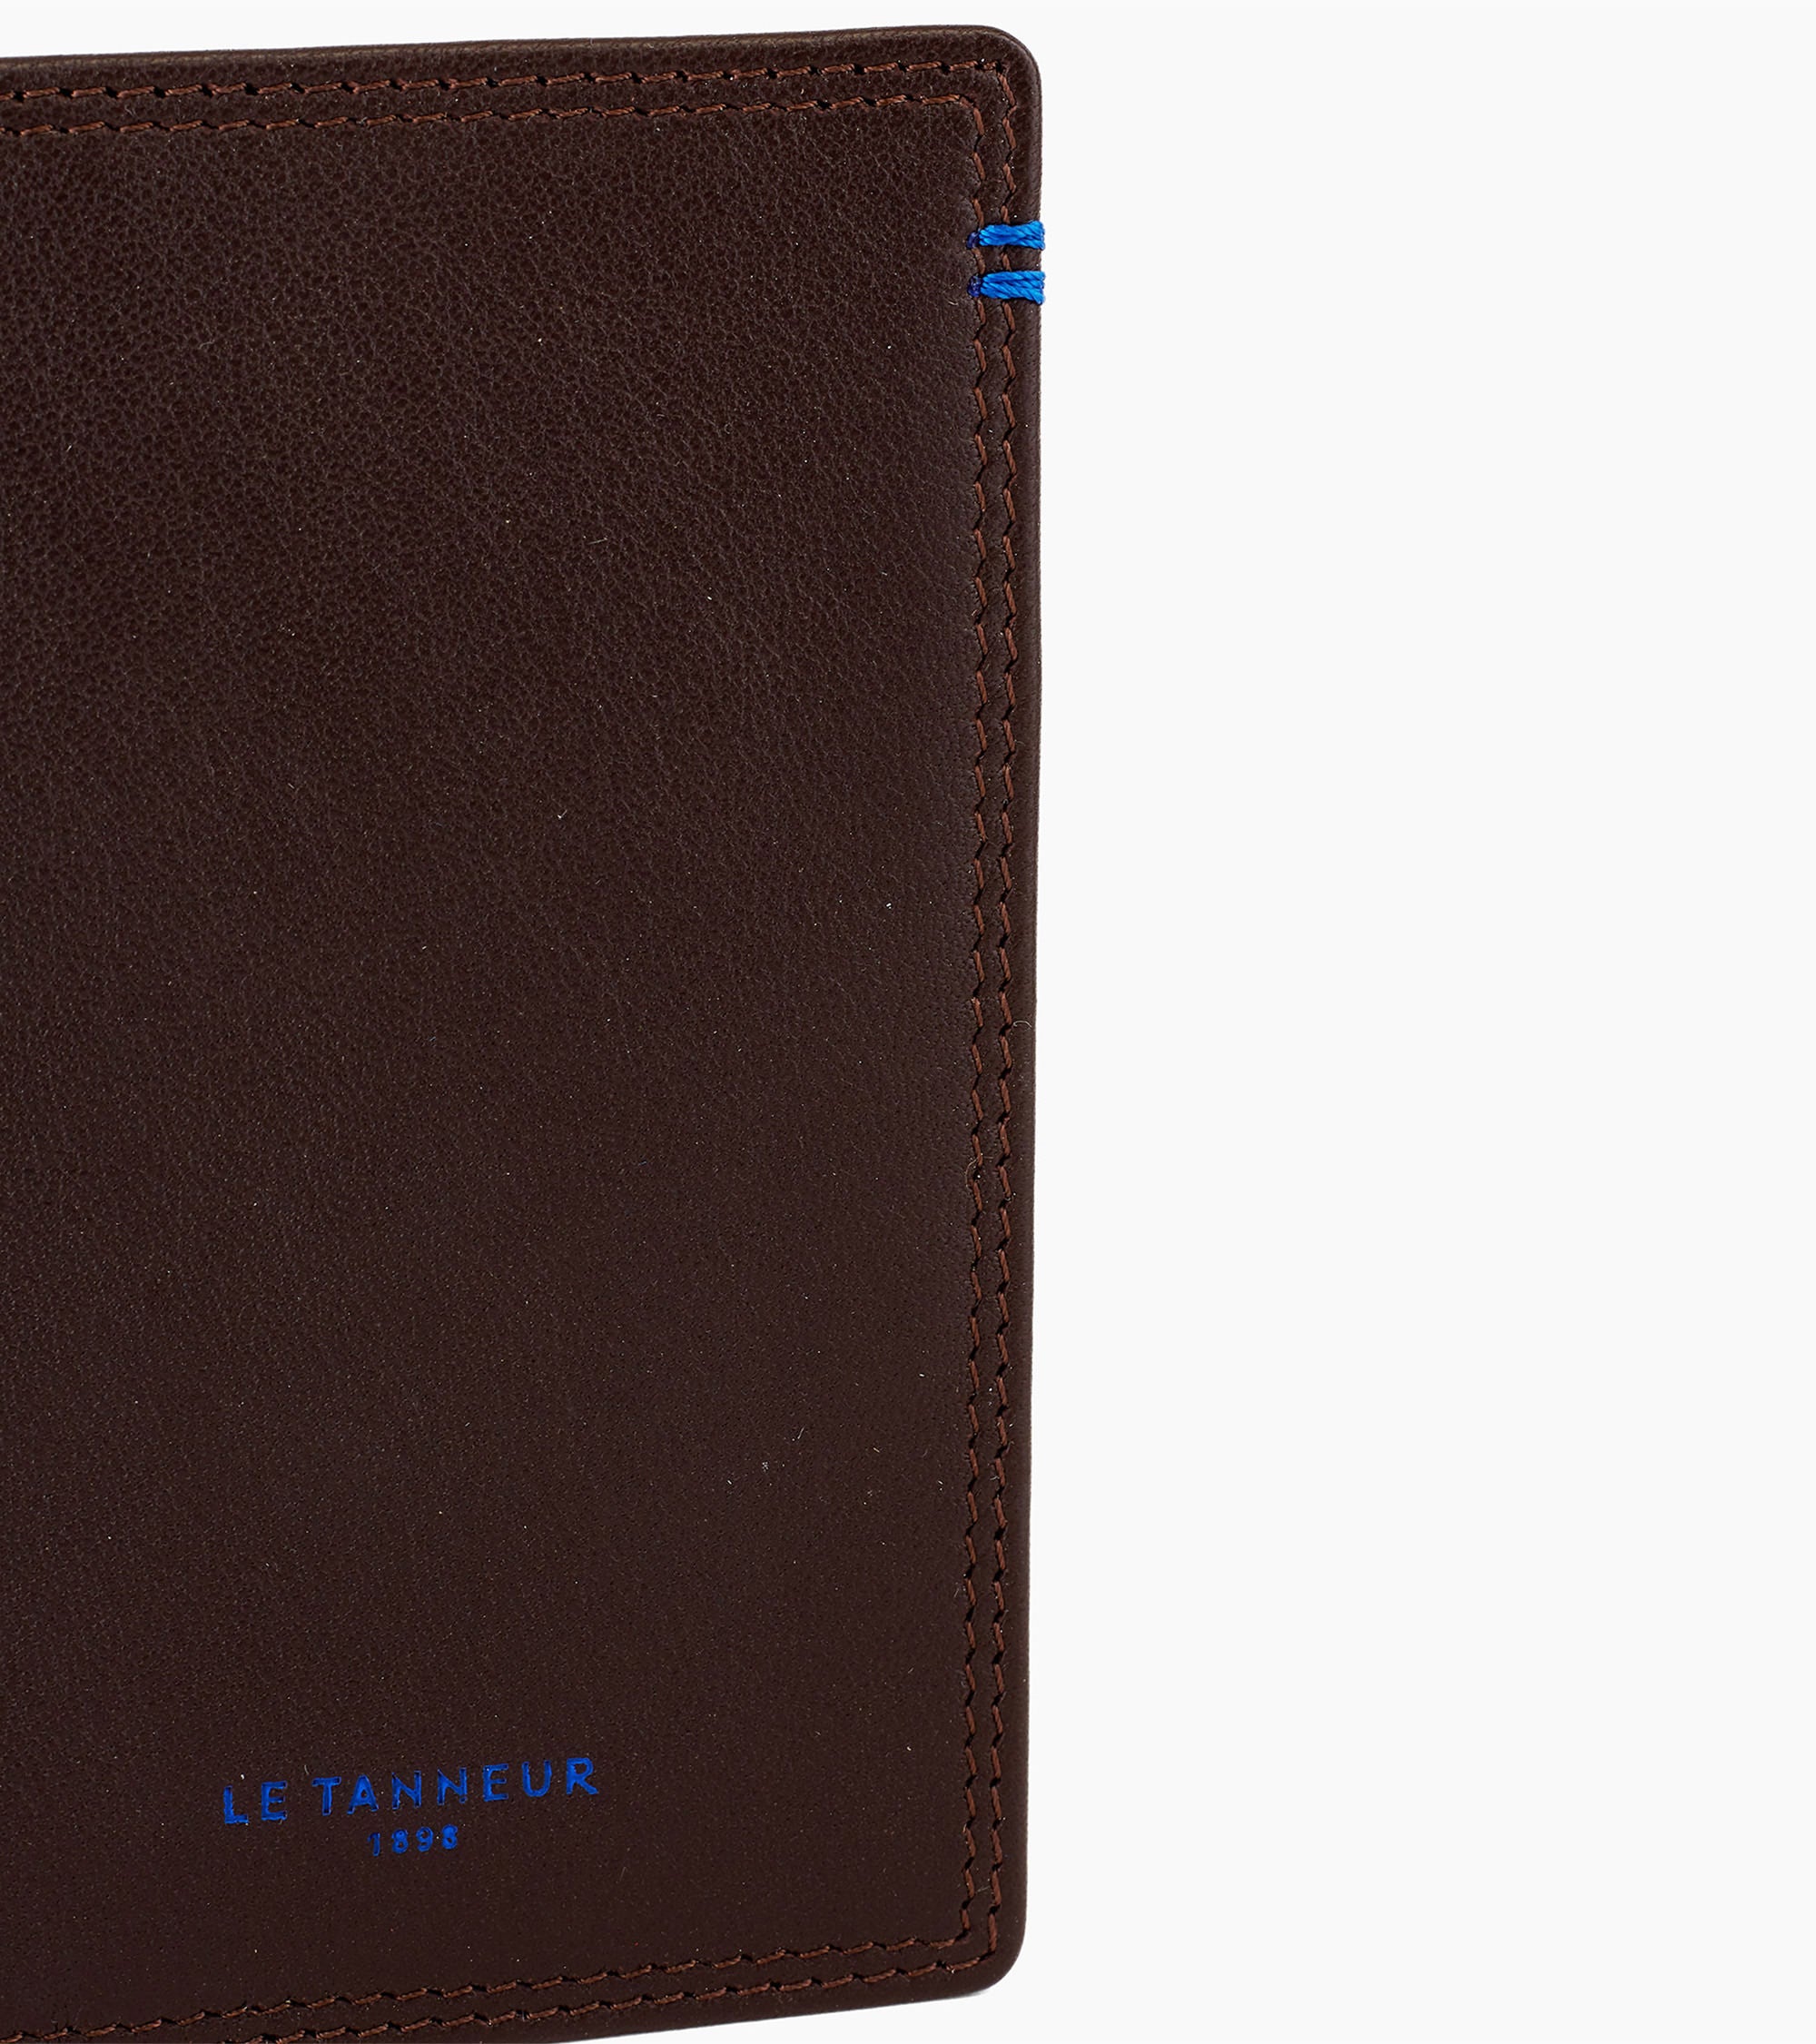 Martin vertical card holder in smooth leather